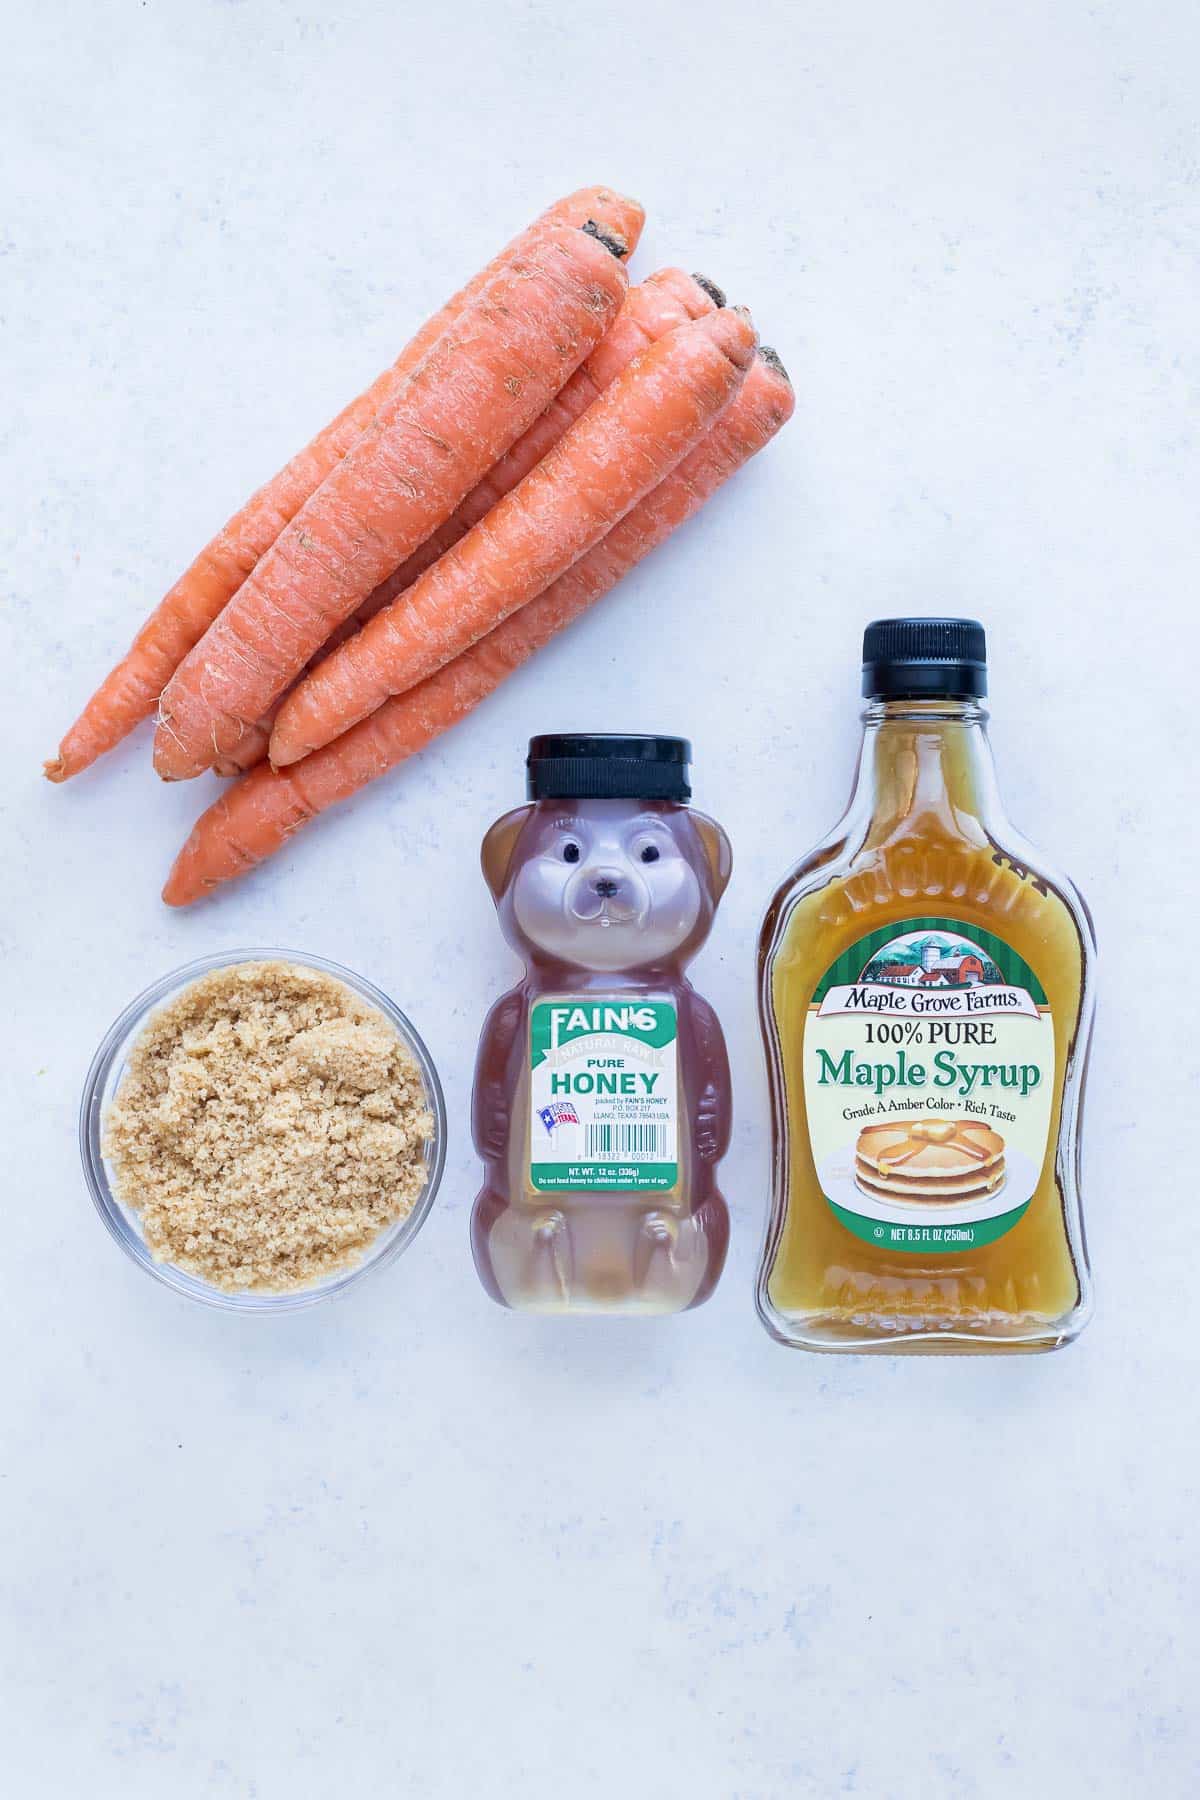 Carrots, honey, brown sugar, and maple syrup are shown for this recipe.